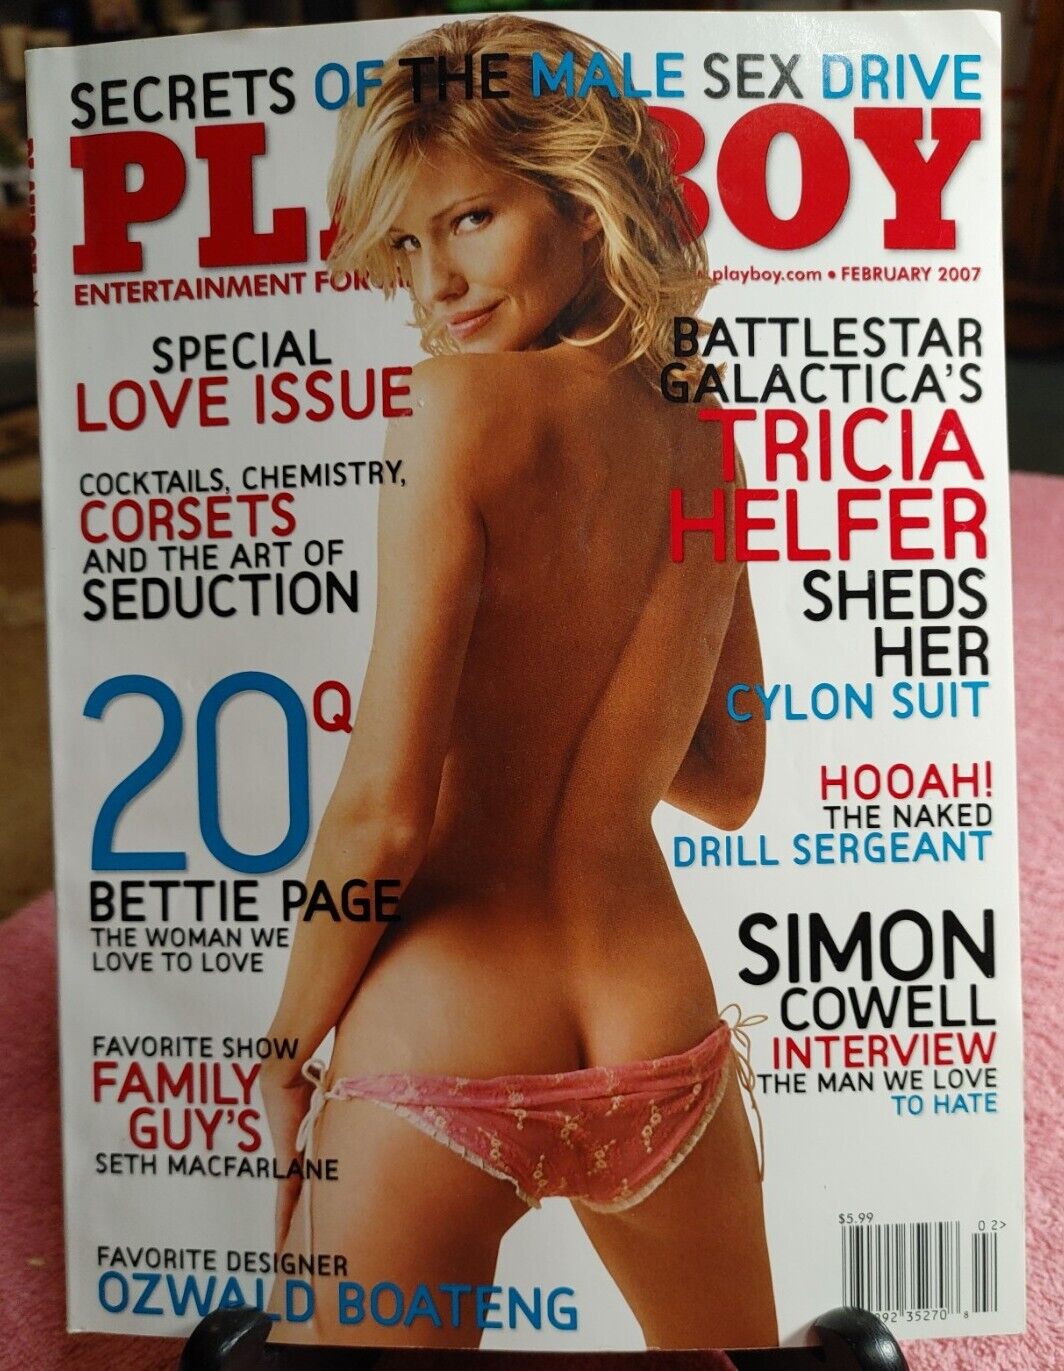 christy salerno recommends tricia helfer playboy photos pic